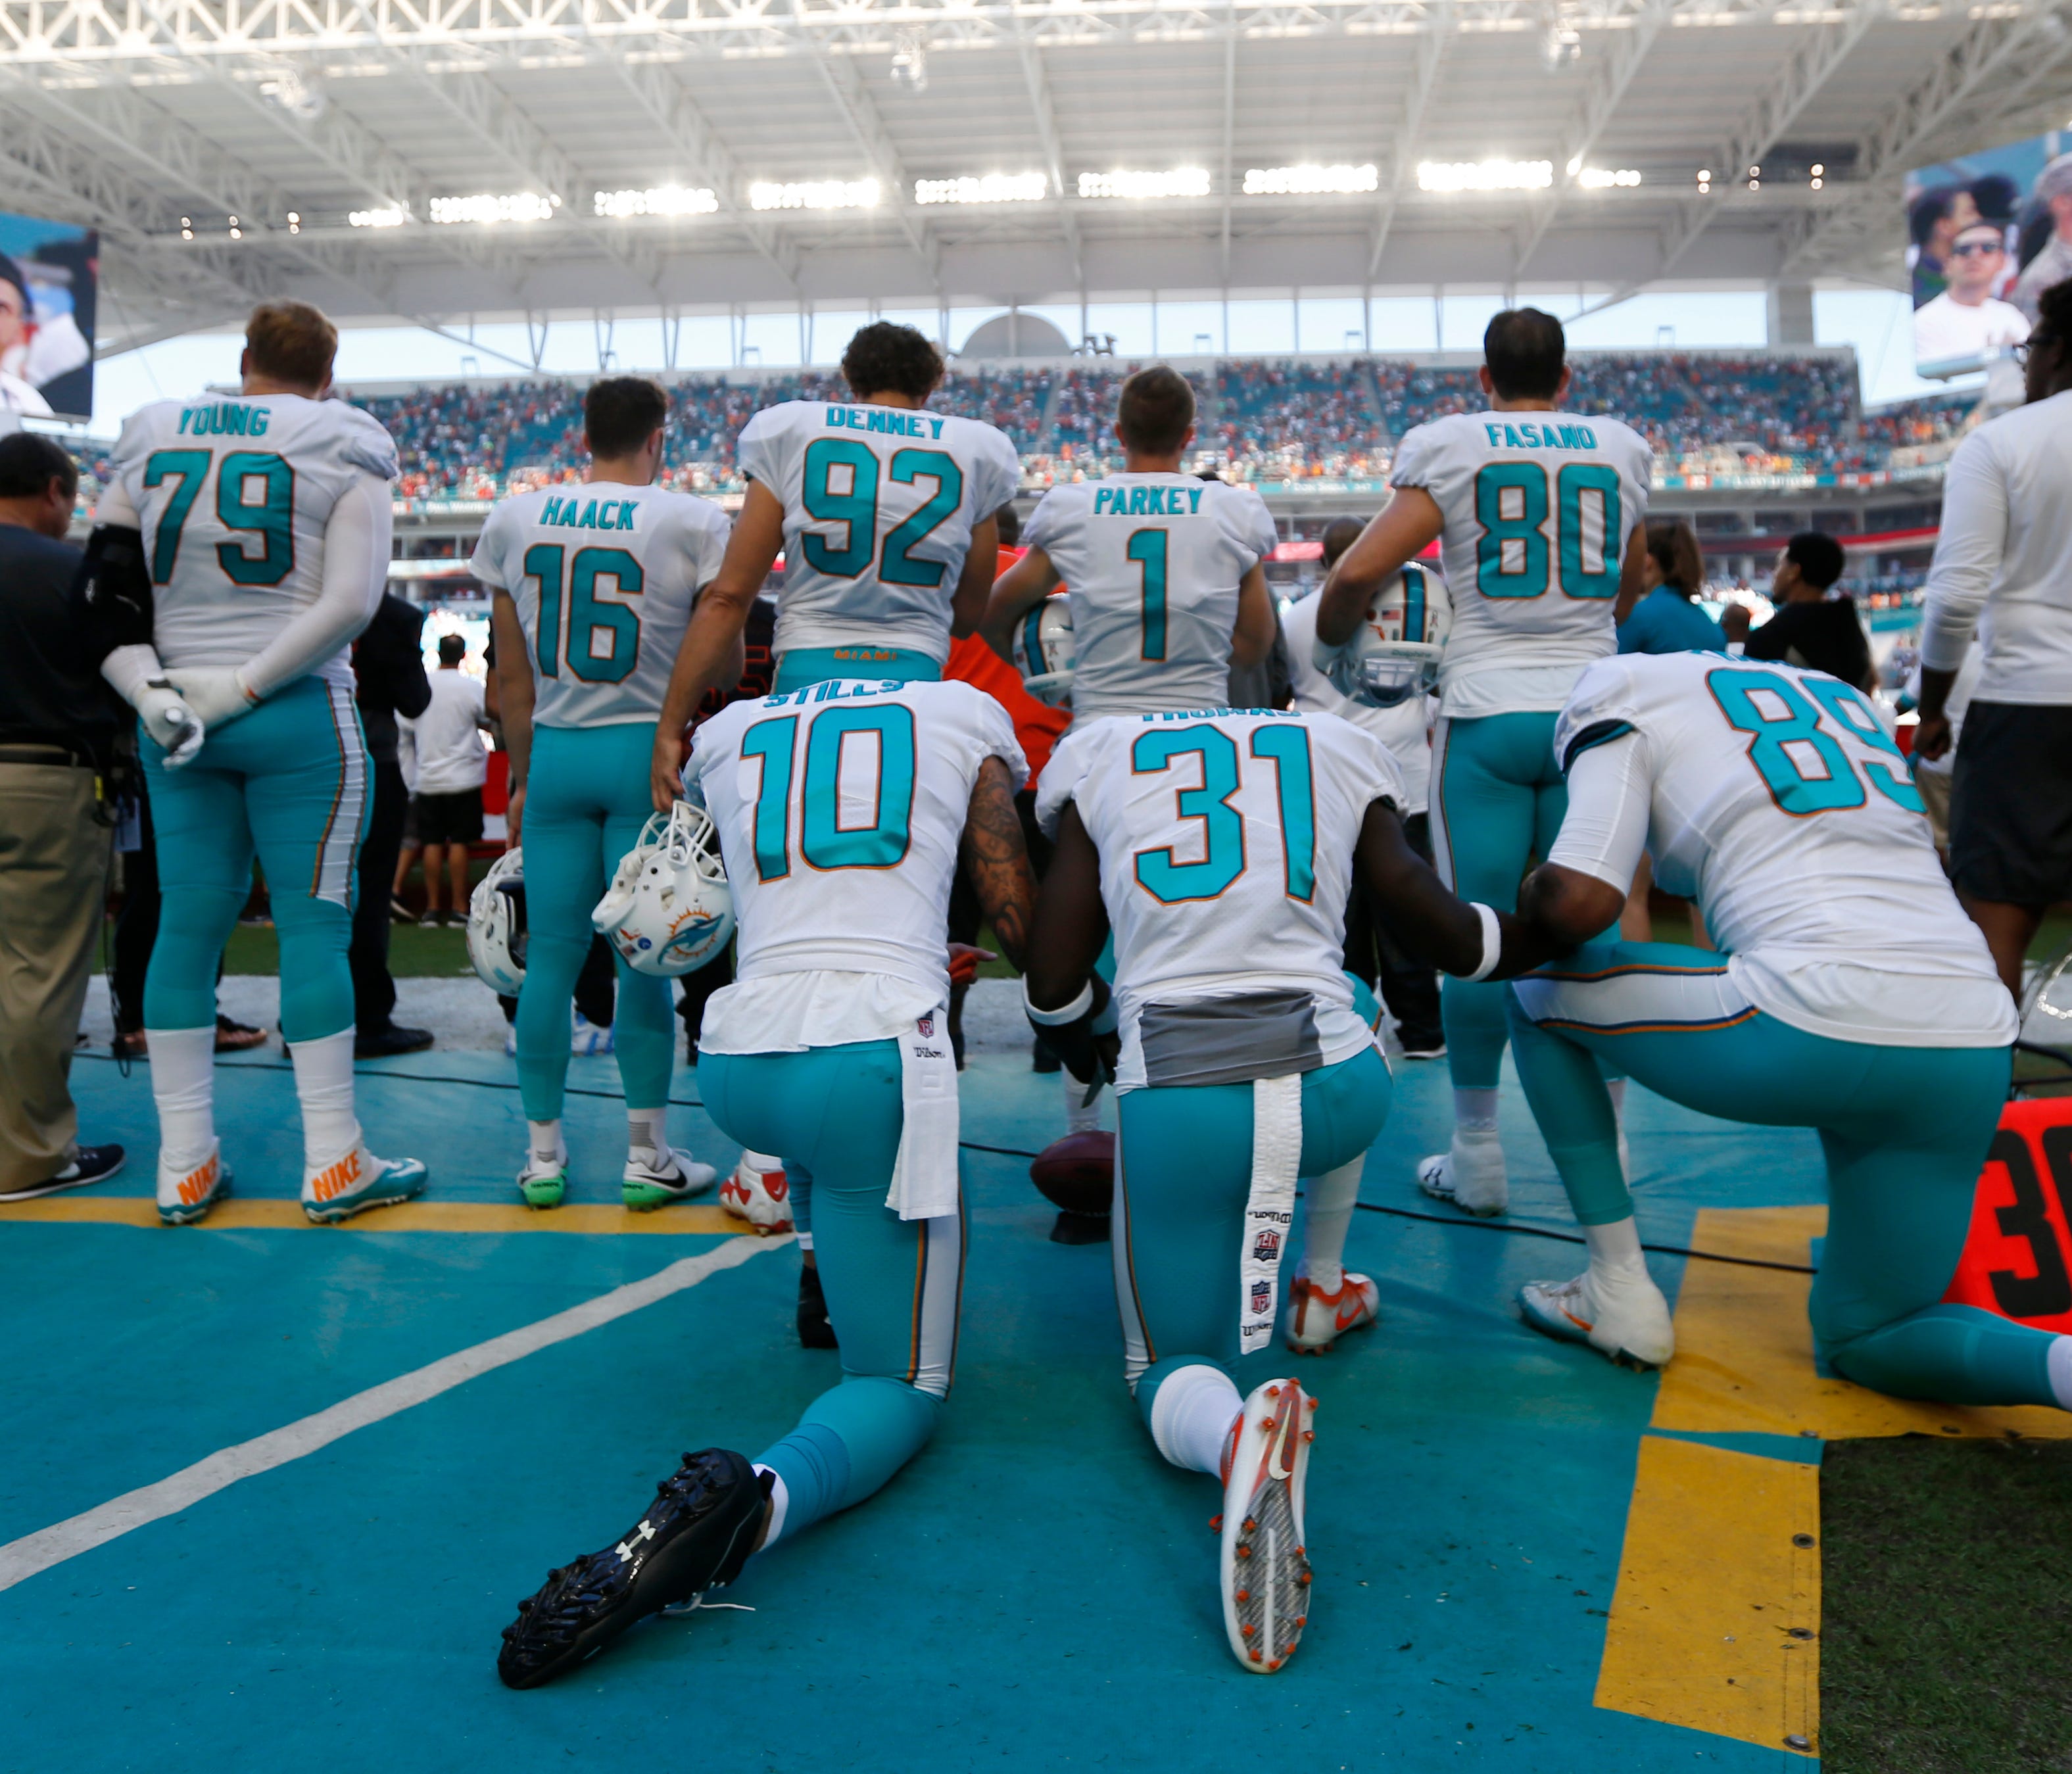 Miami Dolphins wide receiver Kenny Stills (10), free safety Michael Thomas (31) and tight end Julius Thomas (89), kneel during the National Anthem behind their teammates before an NFL football game against the Tampa Bay Buccaneers, Sunday, Nov. 19, 2